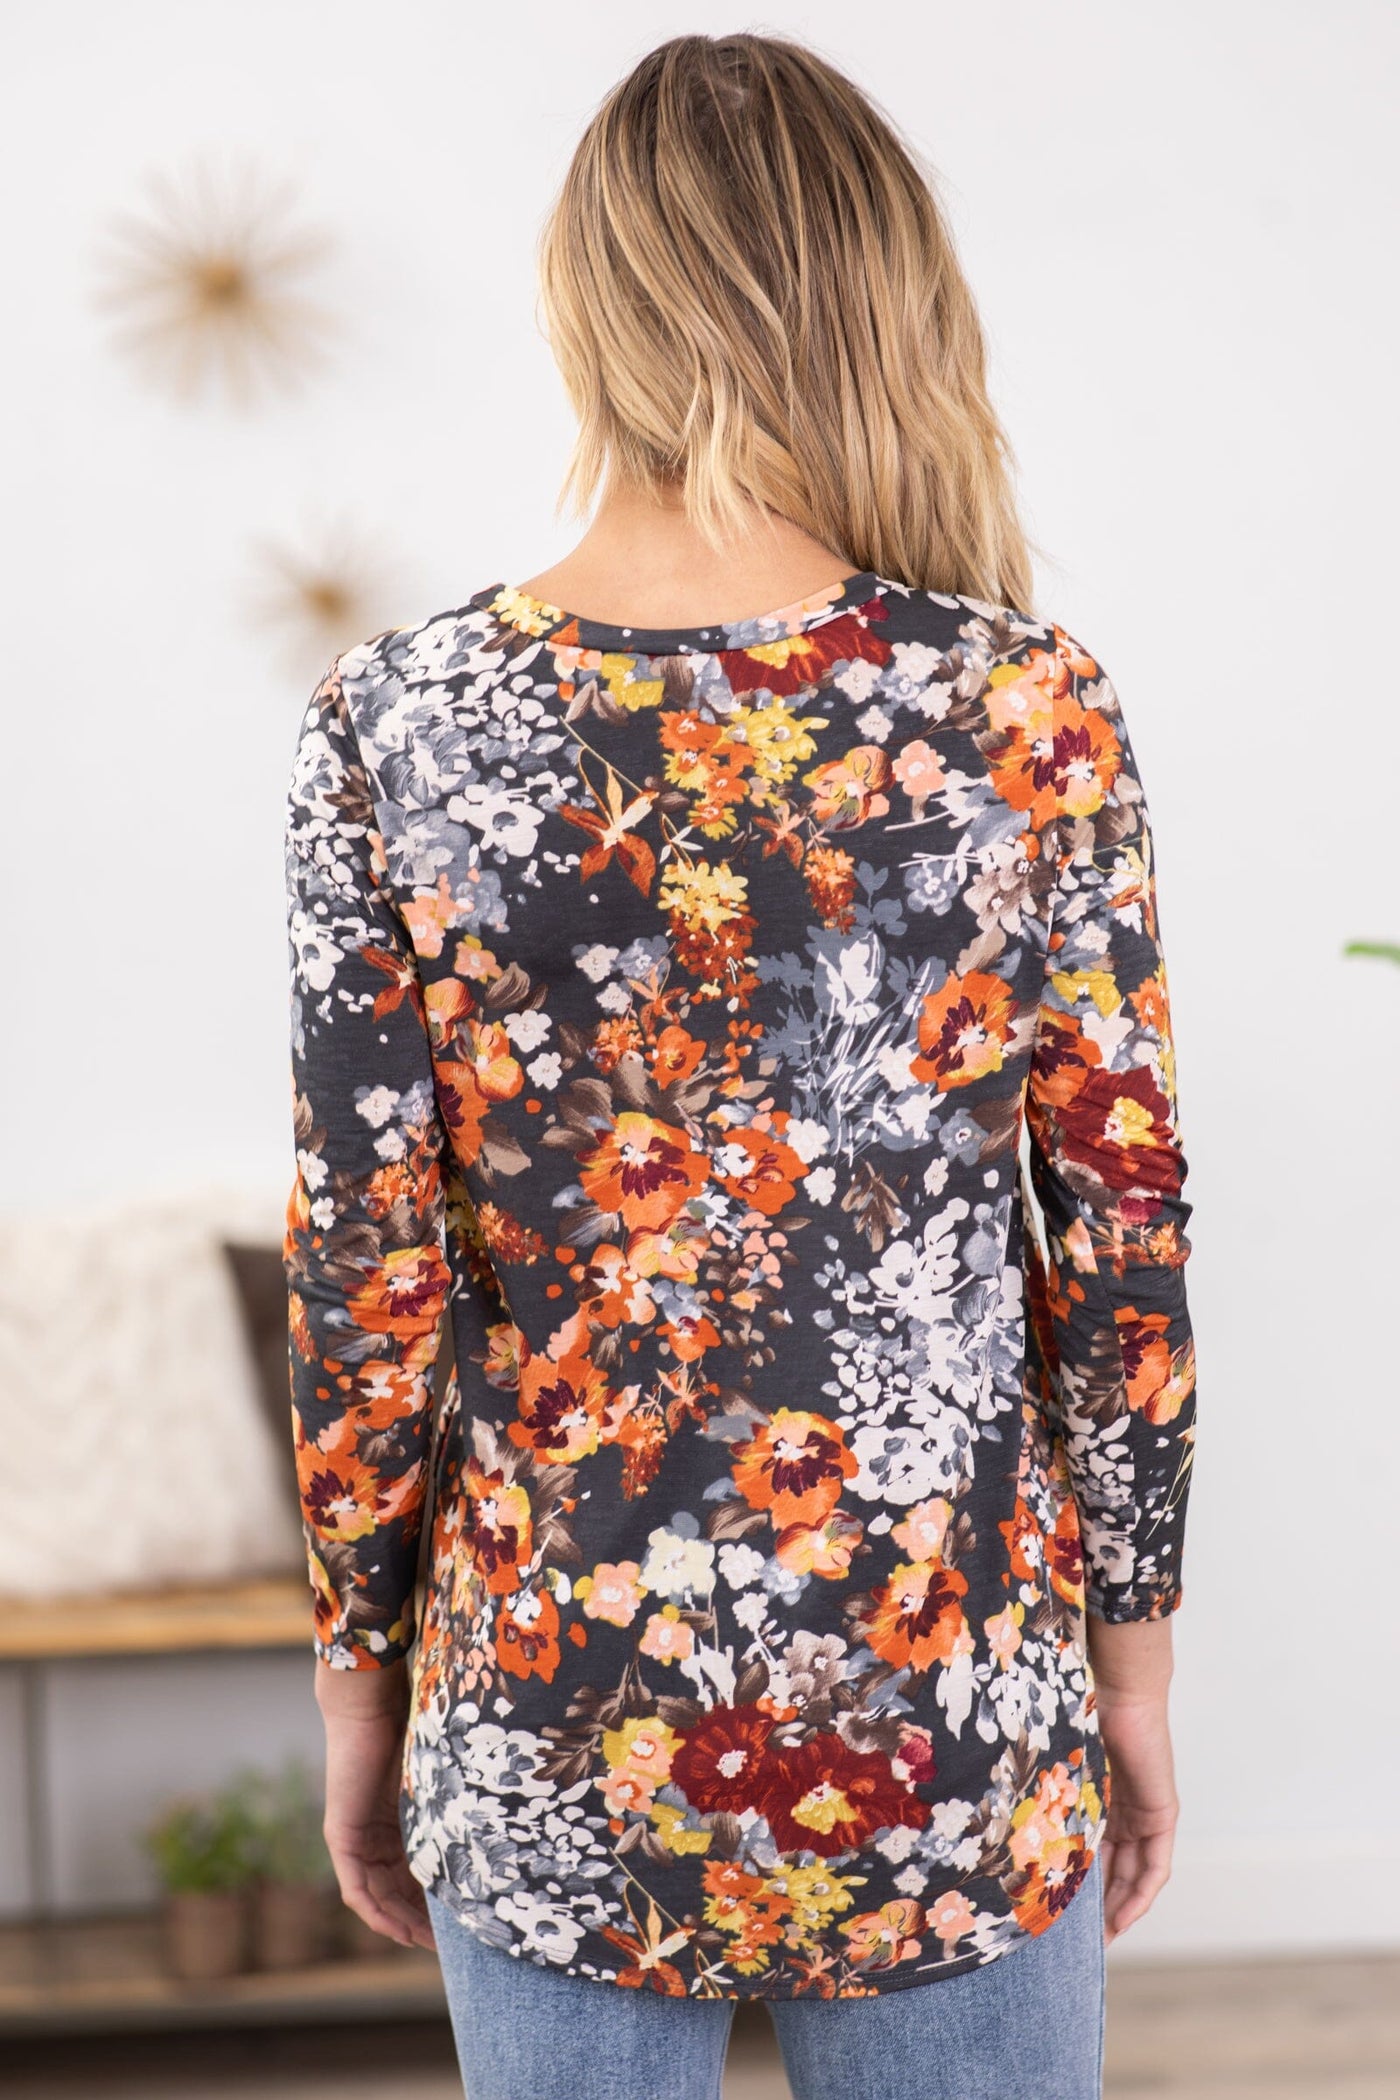 Charcoal and Orange Floral Print Top - Filly Flair